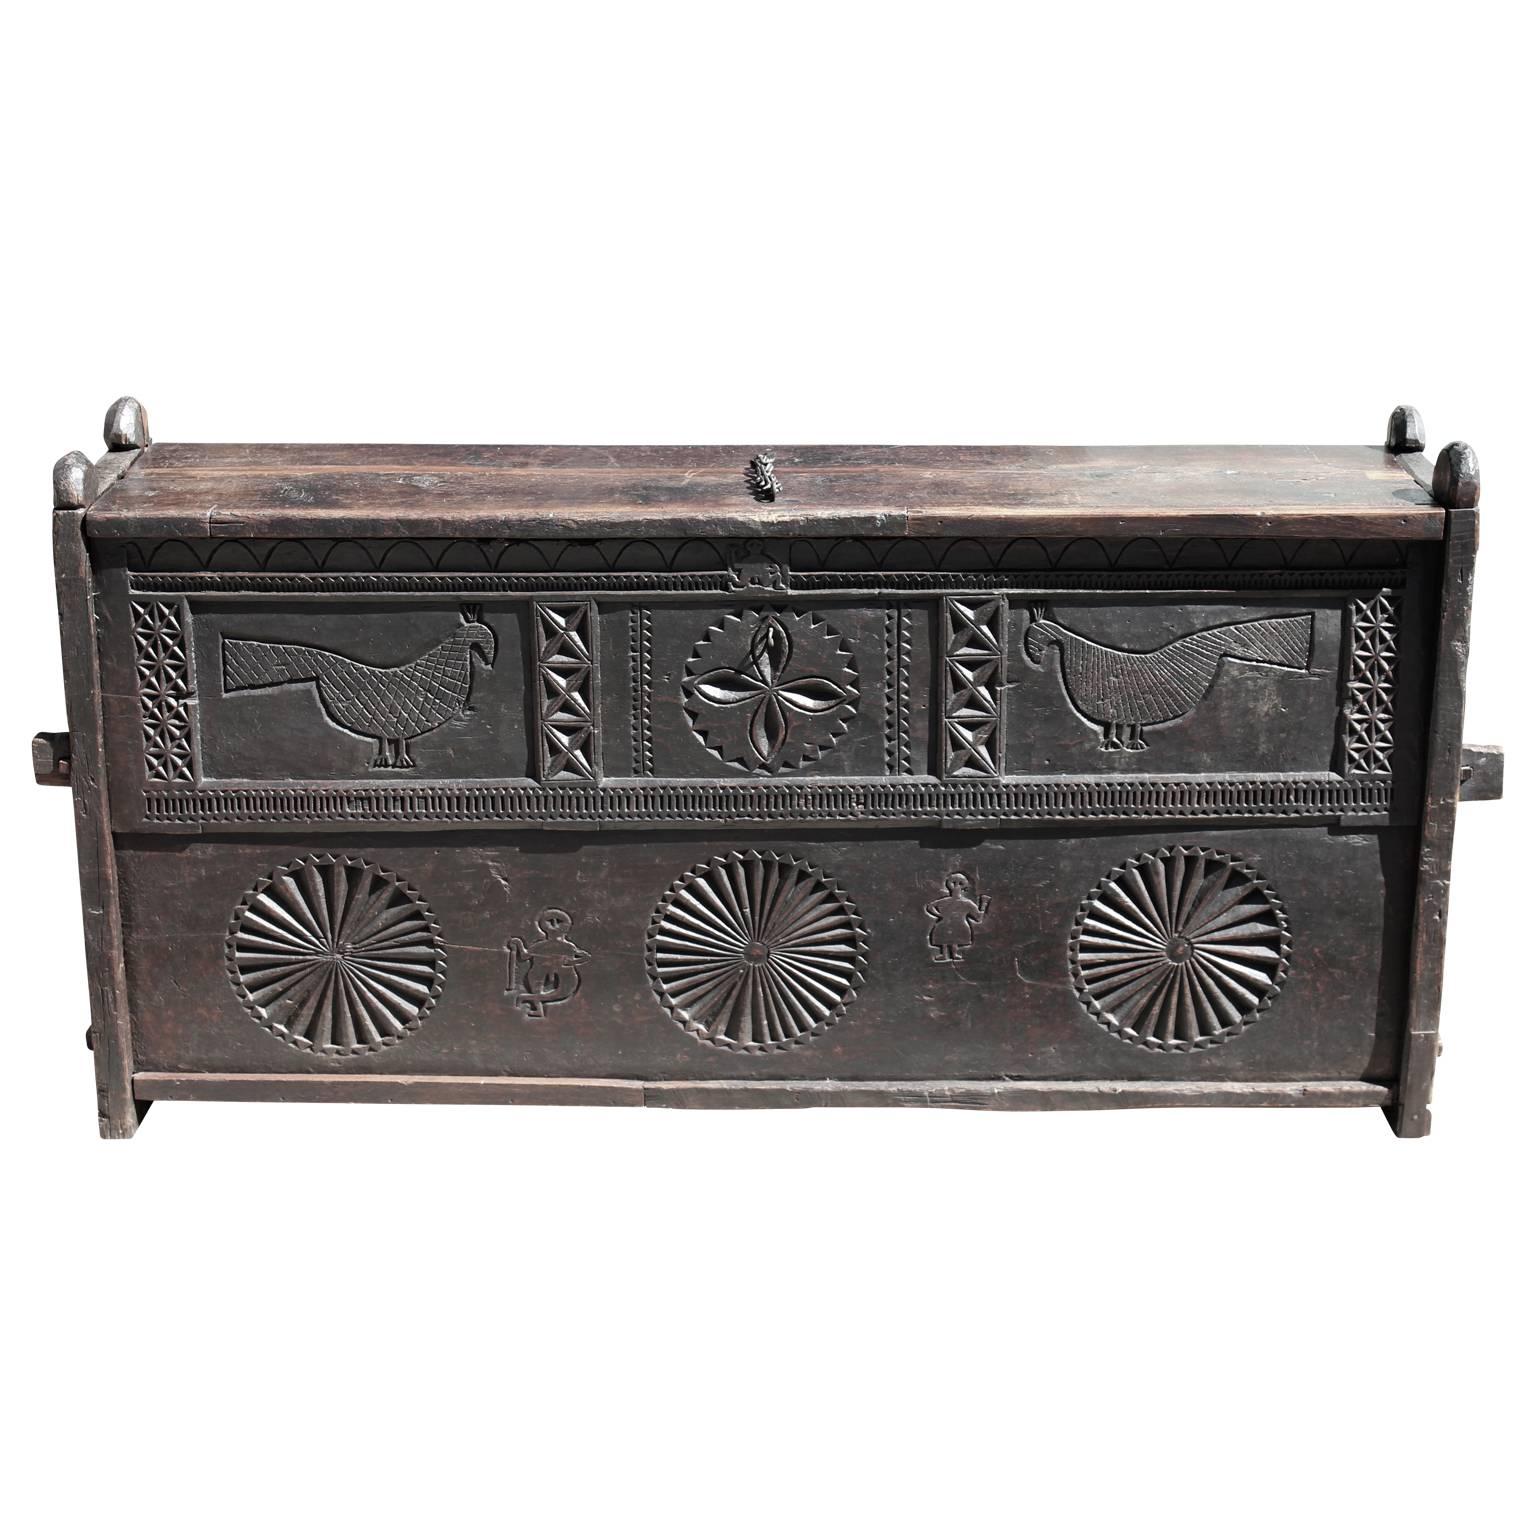 Gorgeous 17th century Jacobean colonial oak chest with hand-carved birds. This piece was constructed with tongue grooves and features large ball feet.